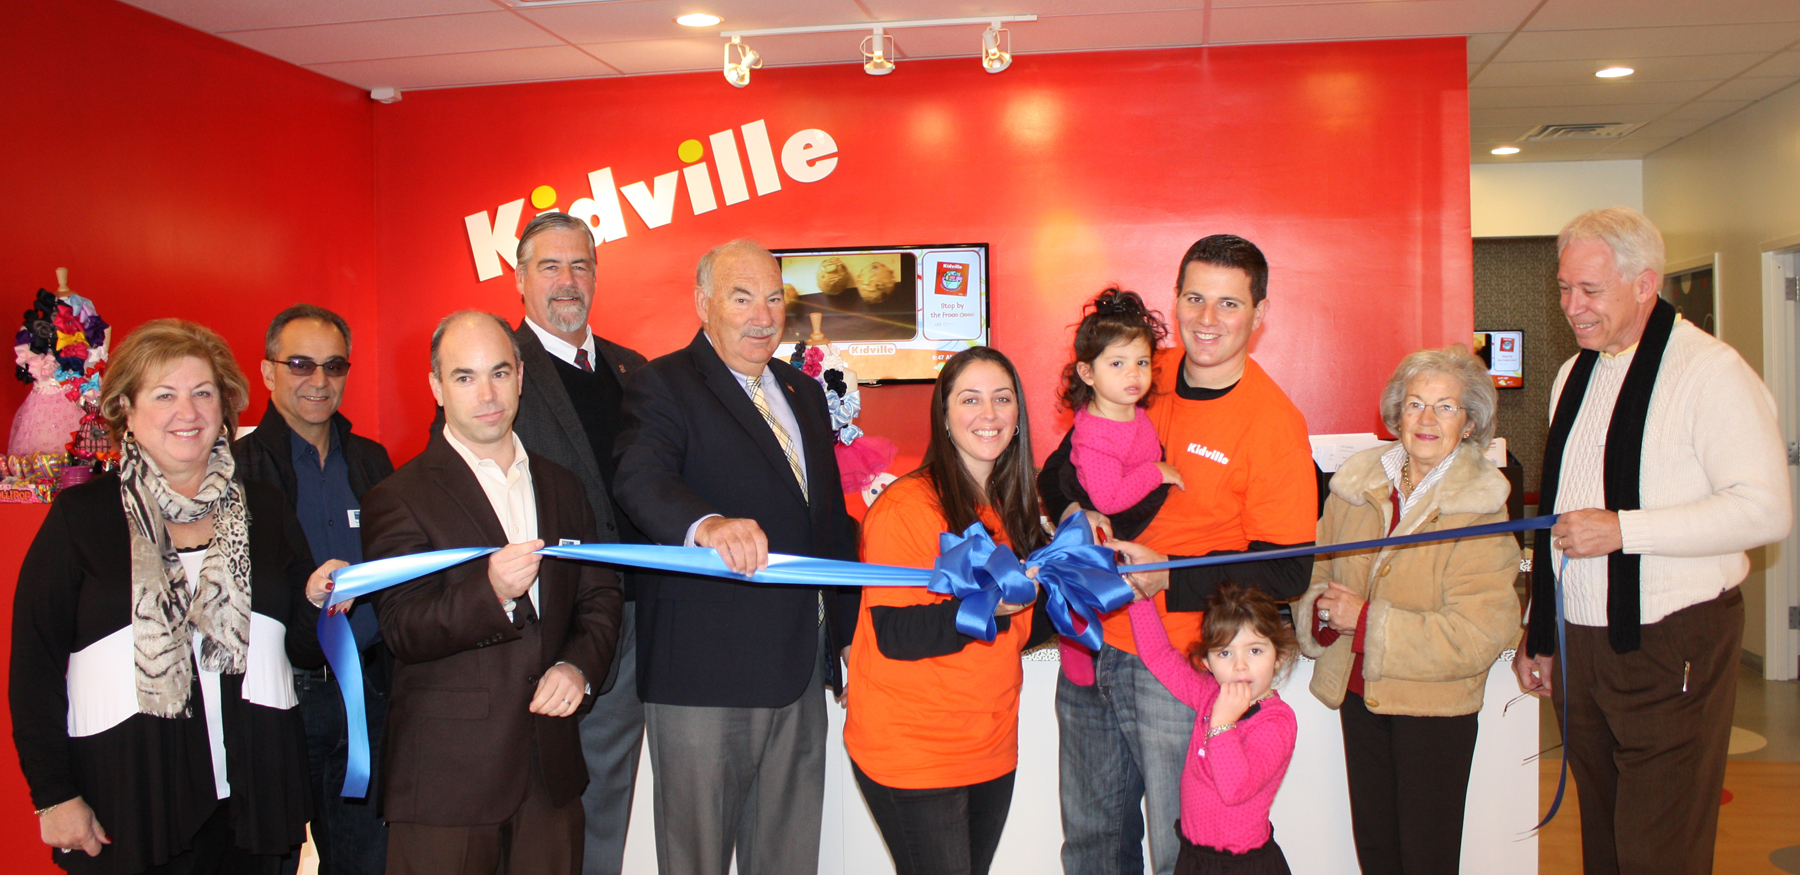 Kidville Mount Kisco was officially welcomed to the community on Monday, Nov. 4 with a ribbon cutting ceremony featuring Mayor Michael Cindrich and Mt. Kisco Chamber of Commerce Board members.